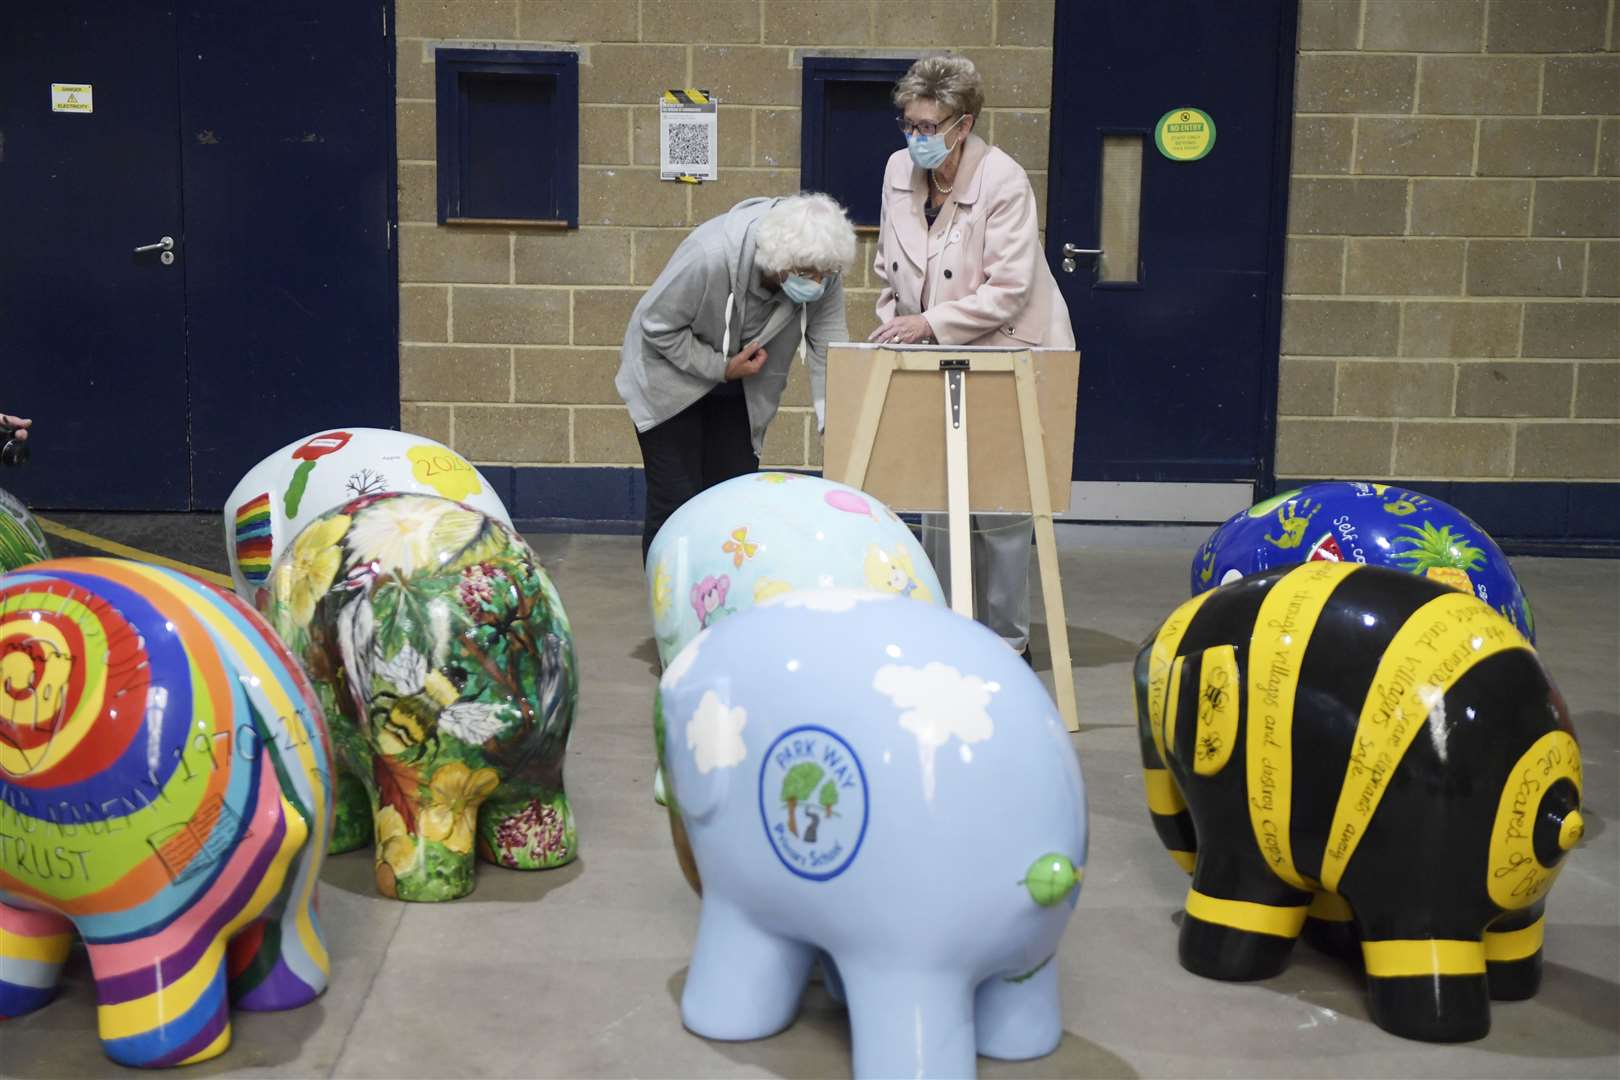 The Heart of Kent Hospice has been running an Elmer the Elephant trail in Maidstone